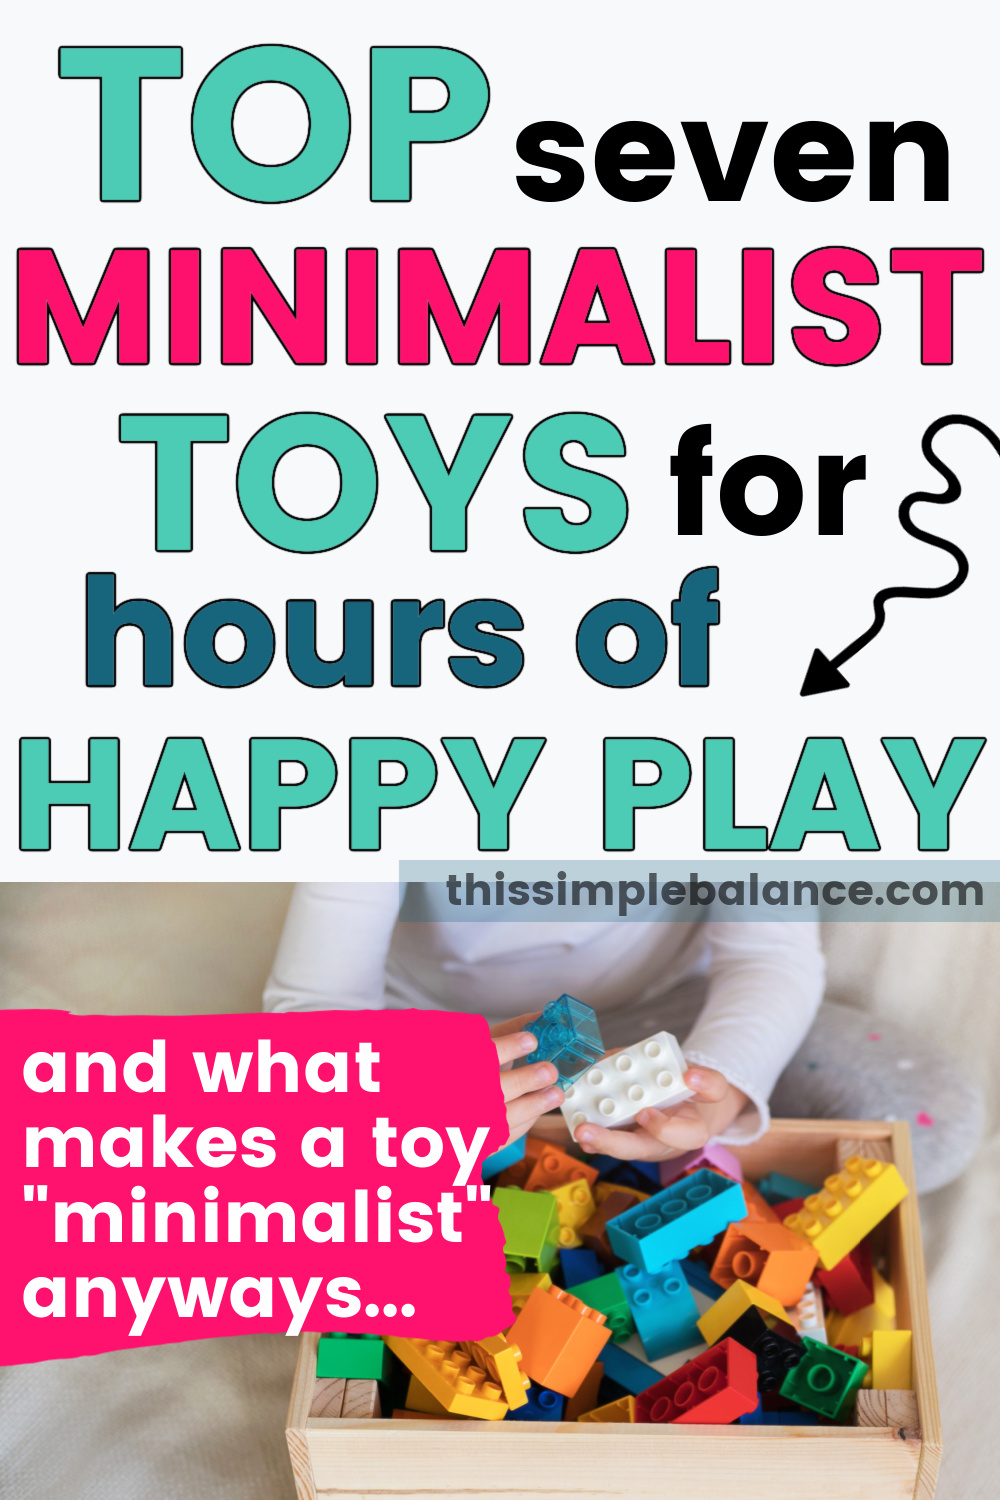 child playing with duplo blocks with text overlay, "top seven minimalist toys for hours of happy play - and what makes a toy "minimalist" anyways..."